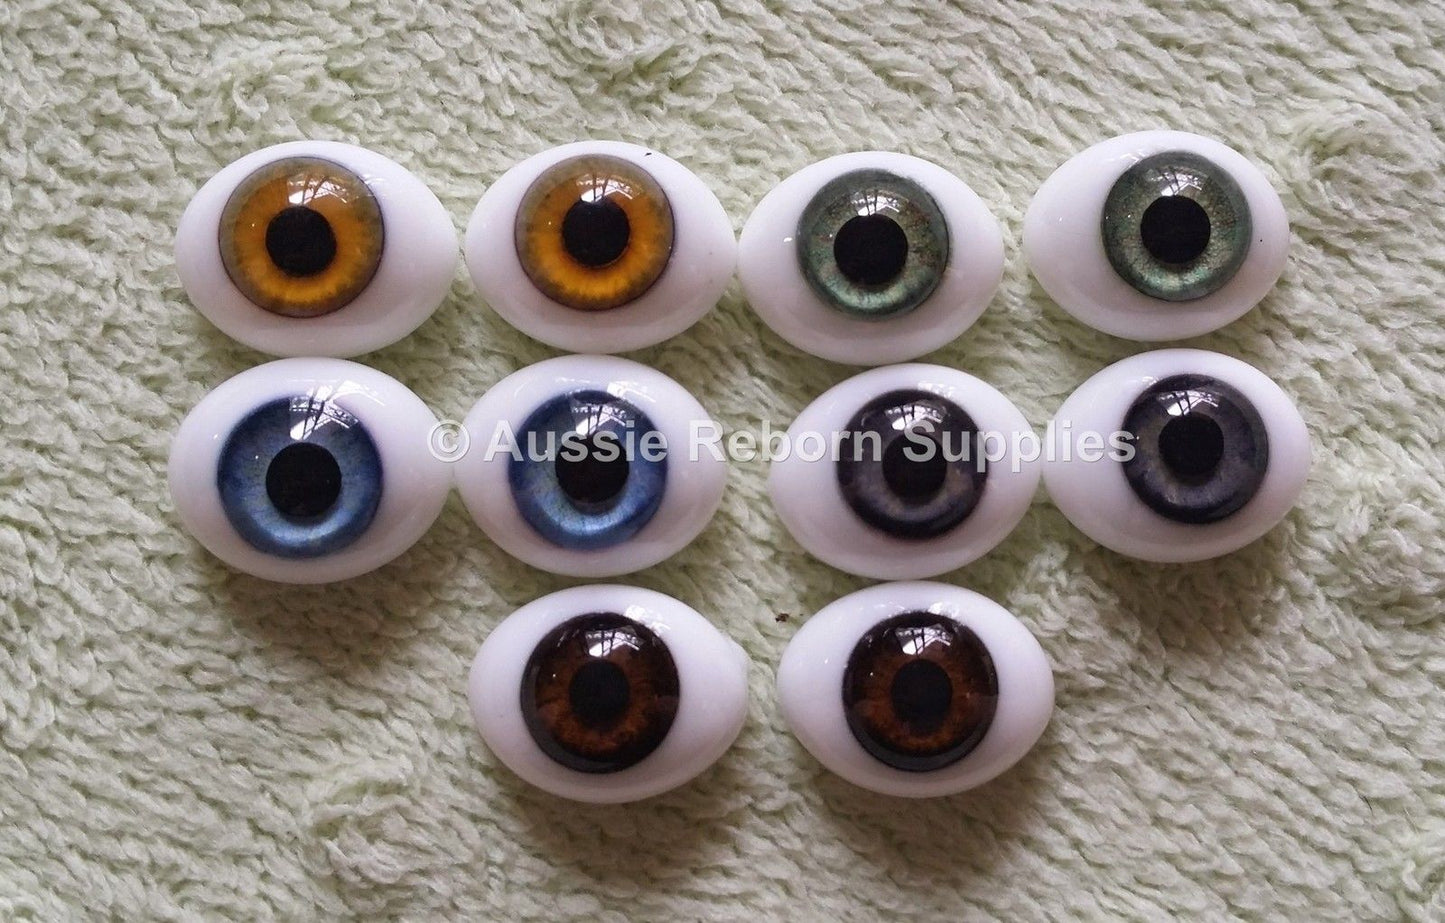 14mm Grey Blue Oval Glass Eyes Reborn Baby Doll Making Supplies